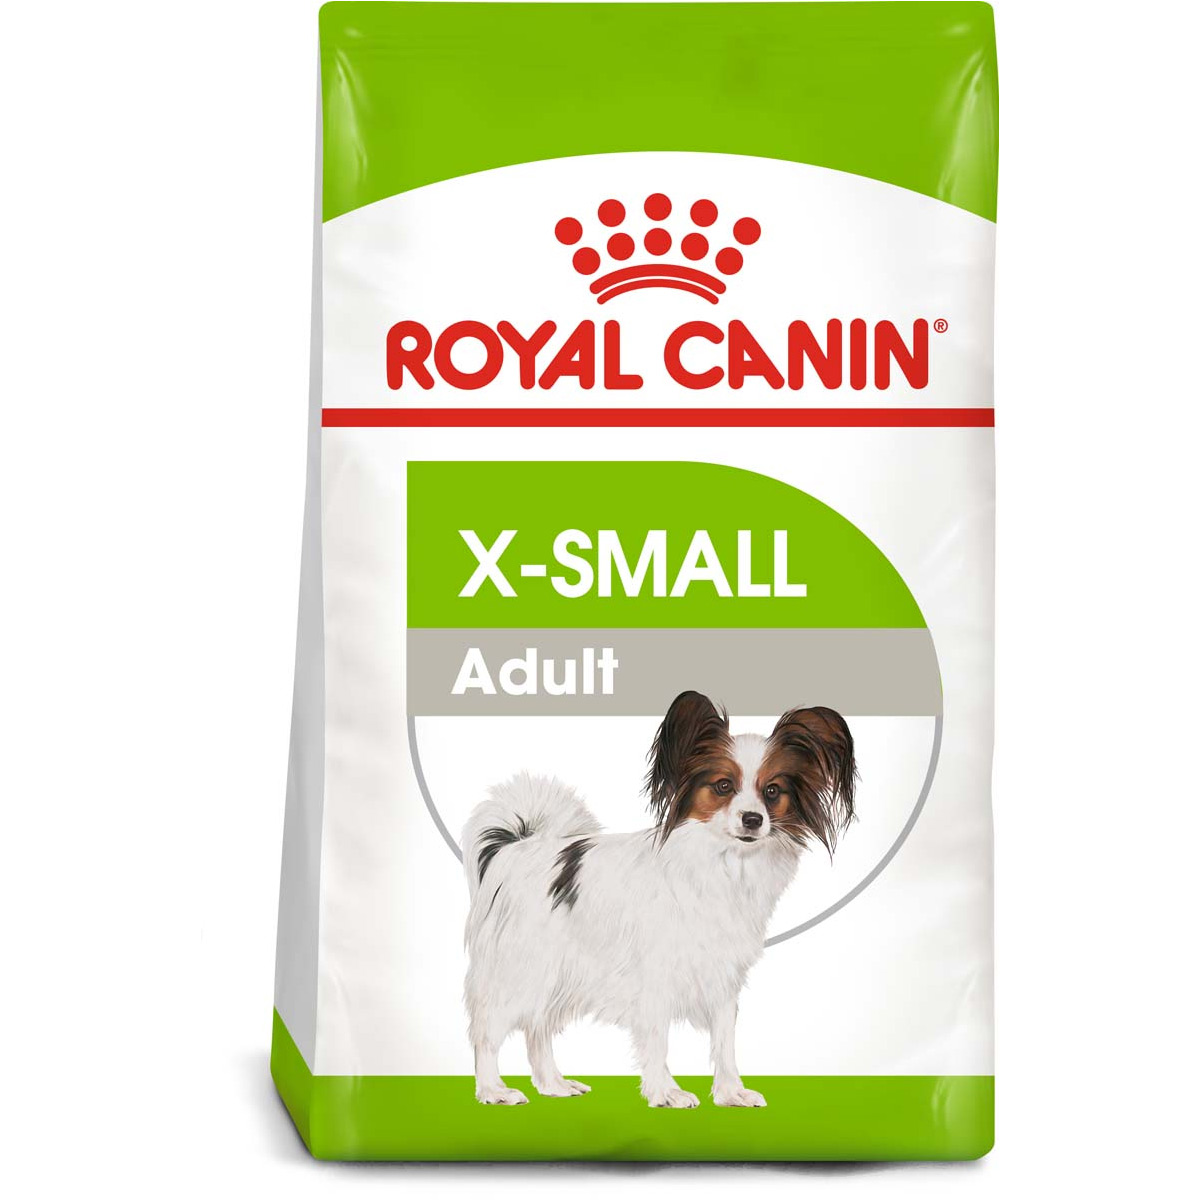 ROYAL CANIN X-SMALL Adult 2 × 3 kg